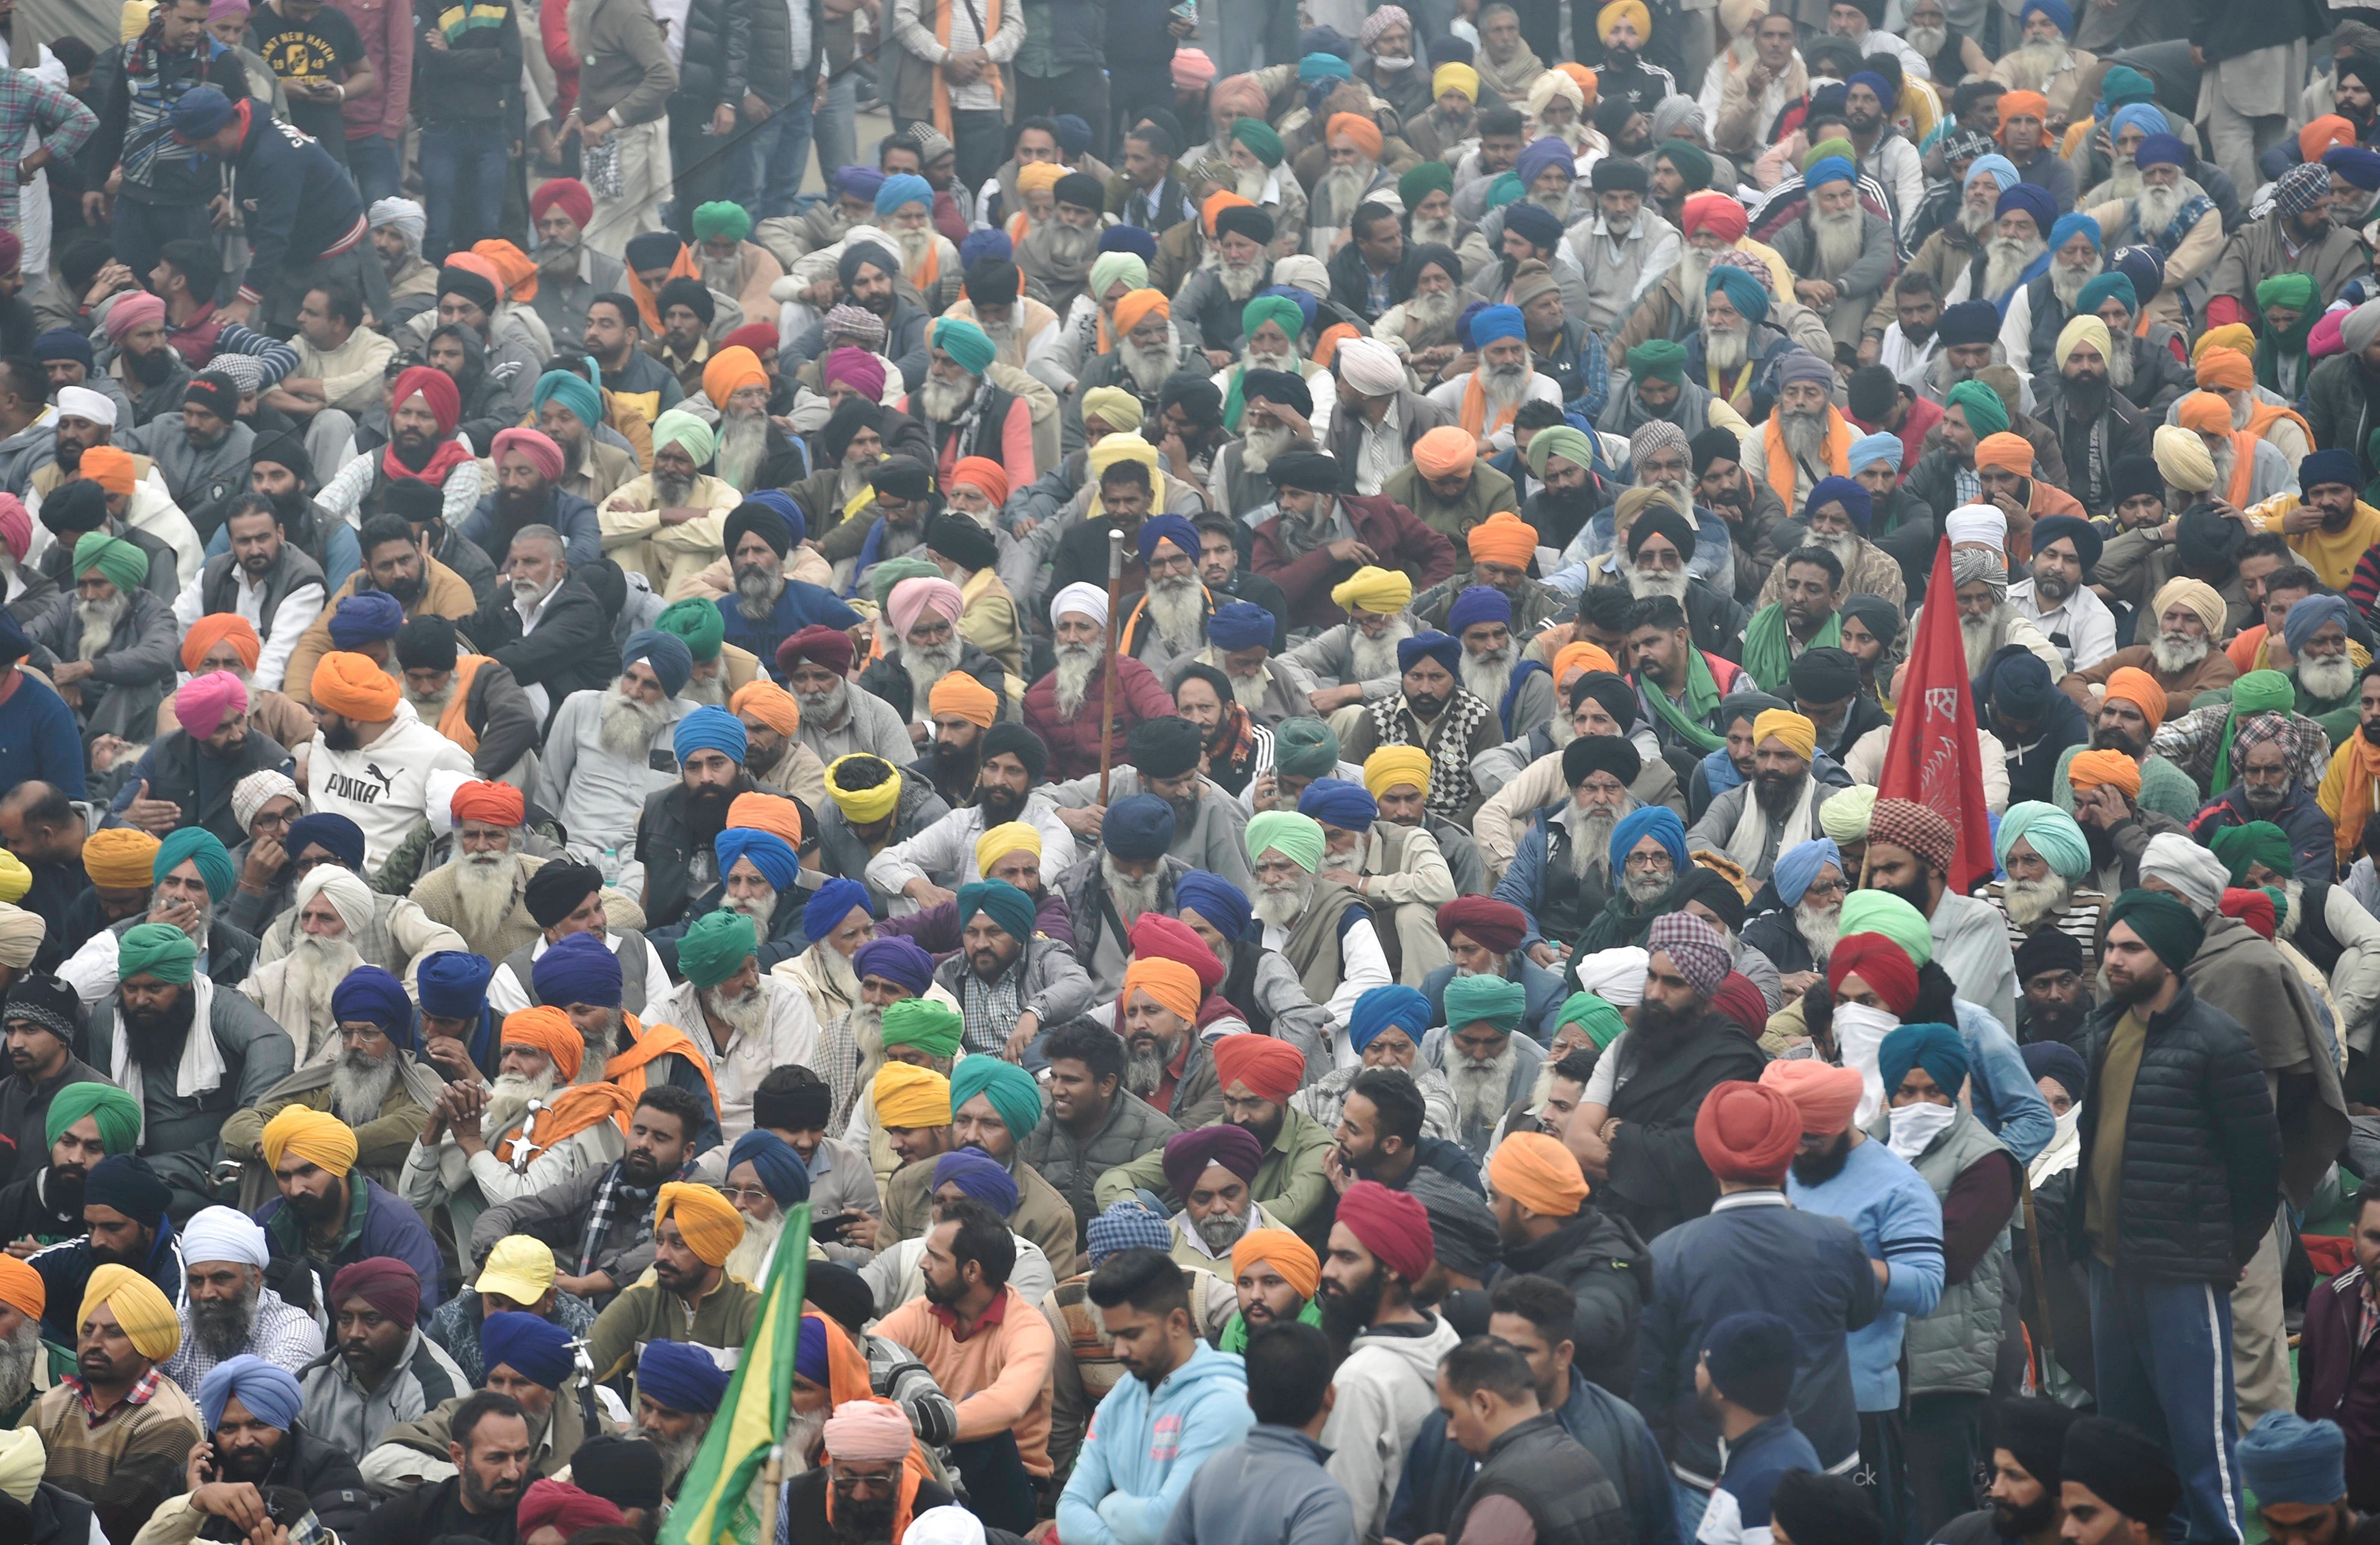  Farmers gather in large numbers at Singhu border during their 'Delhi Chalo' protest march against the new farm laws, in New Delhi, Saturday, Dec. 12, 2020. Credit: PTI Photo